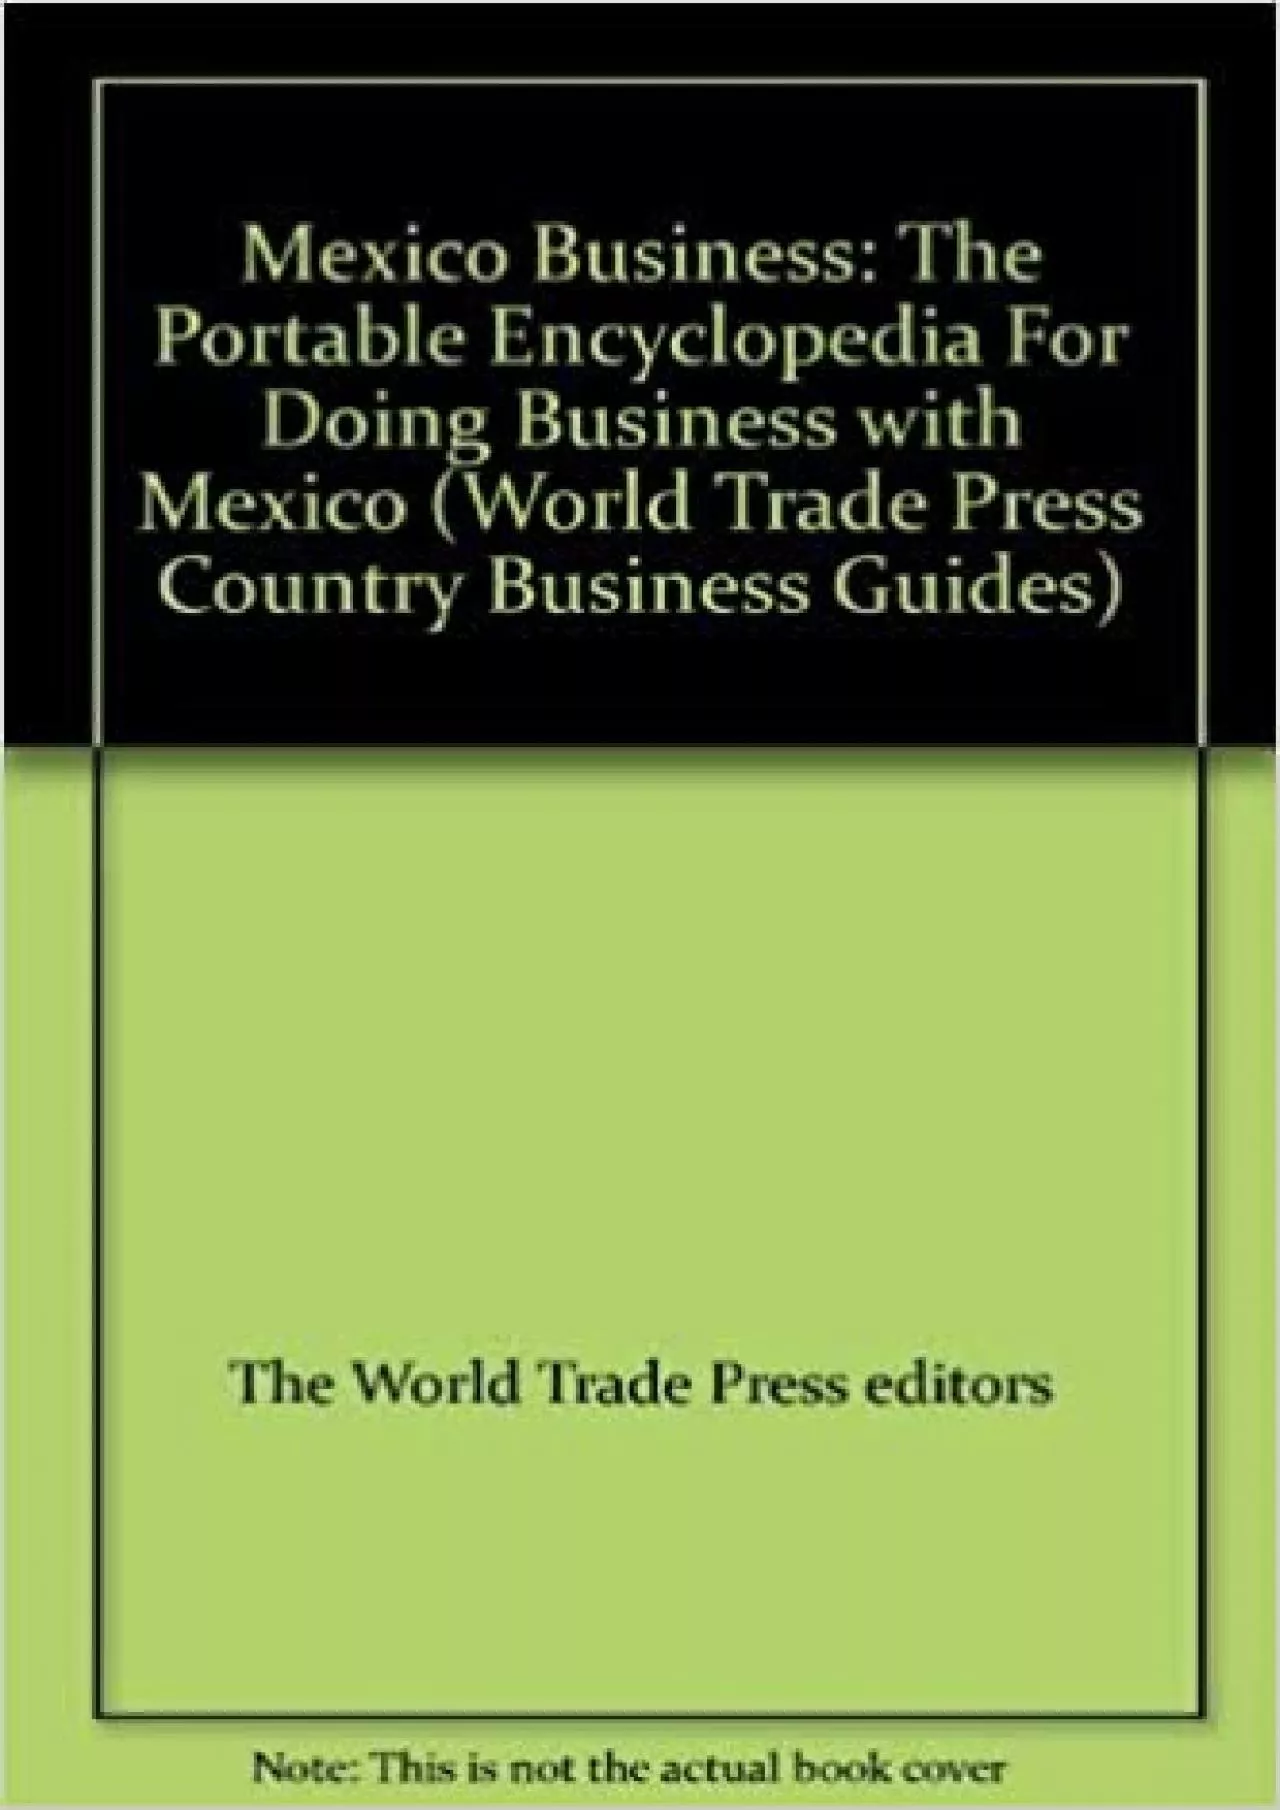 Mexico Business: The Portable Encyclopedia For Doing Business with Mexico (World Trade